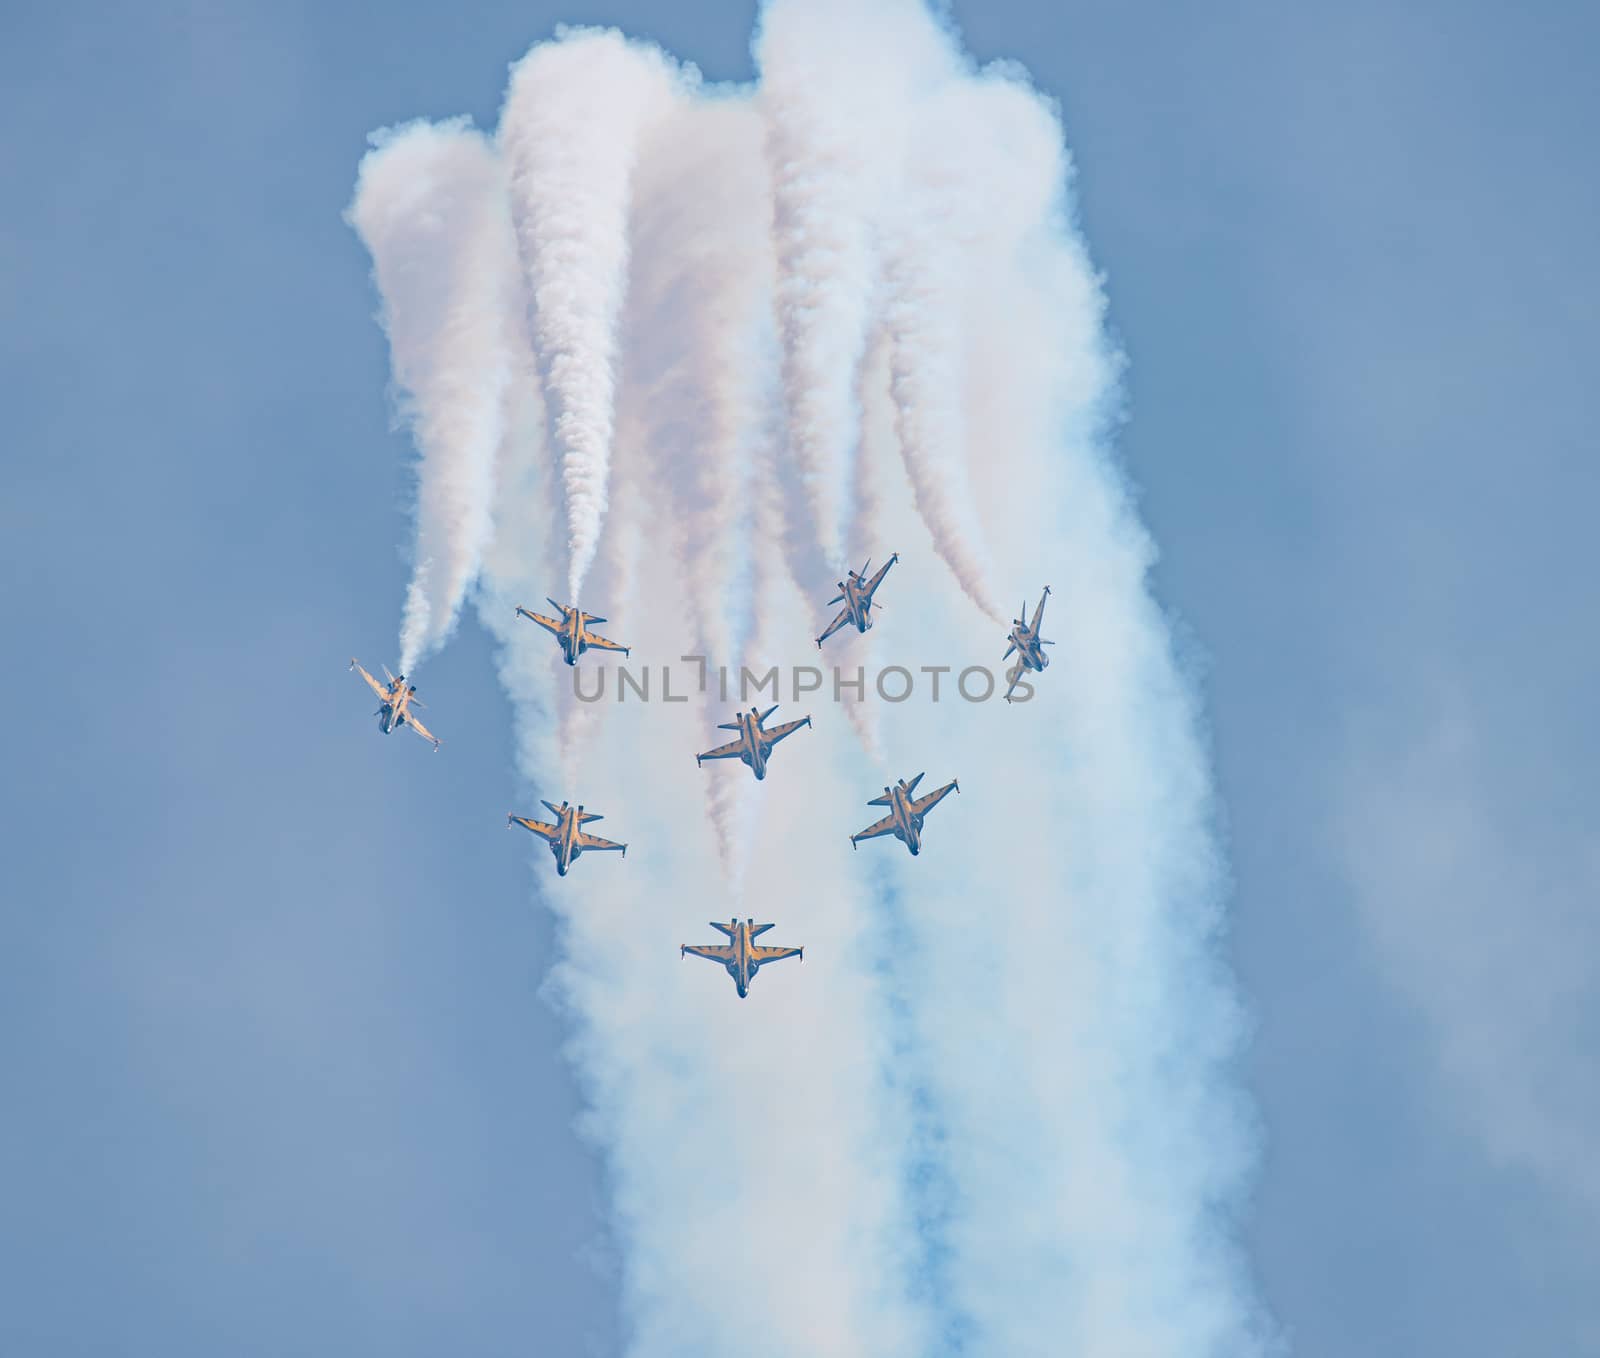 Singapore - February 14, 2016: The ROKAF Black Eagles from South Korea in their T50B Golden Eagles during the Aerobatic Flying Displays at Singapore Airshow at Changi Exhibition Centre in Singapore.